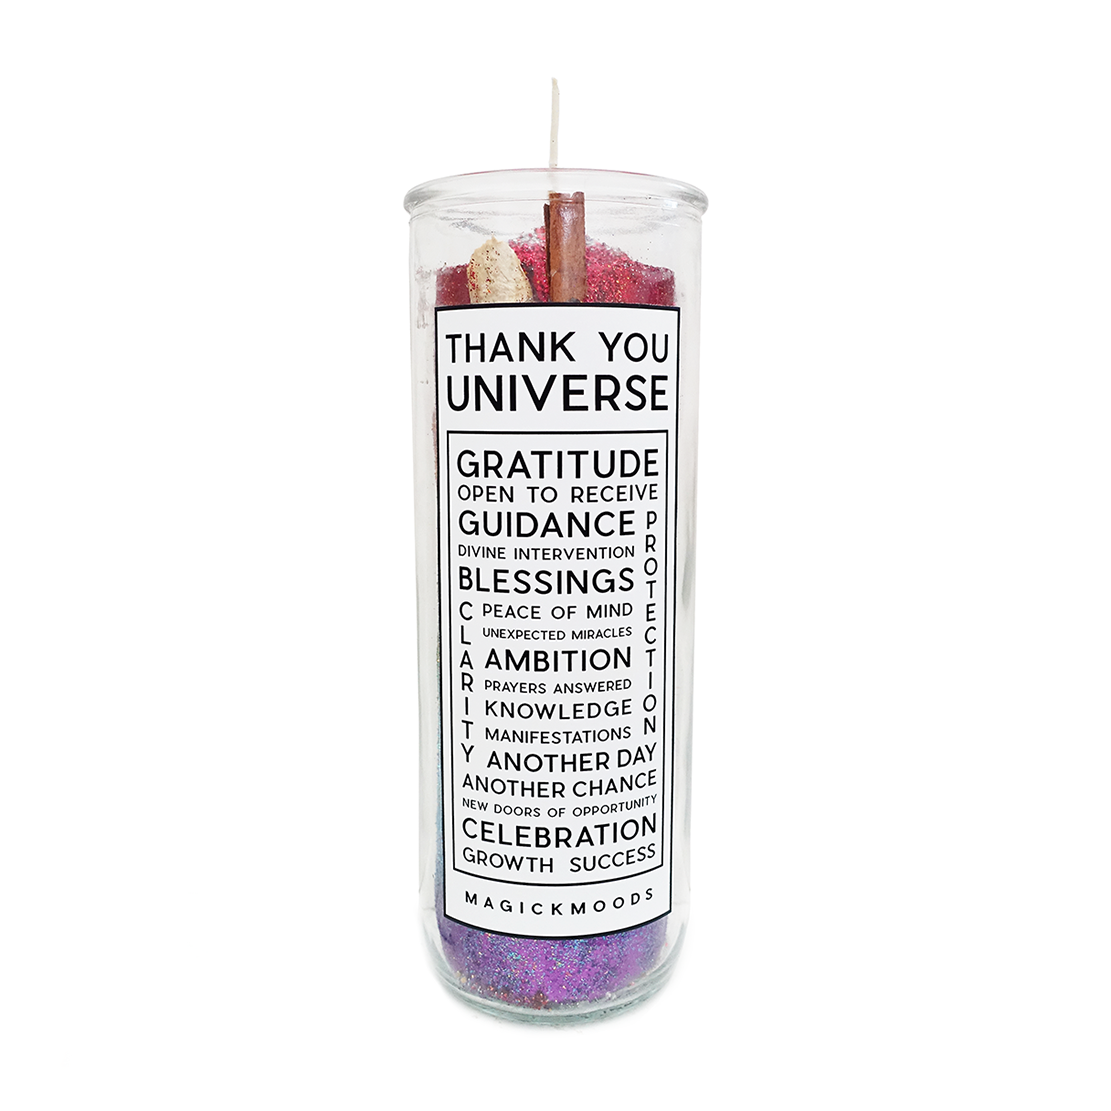 Thank You Universe 7-Day Meditation Candle - PREORDER - Ships by Nov 30th, 2023